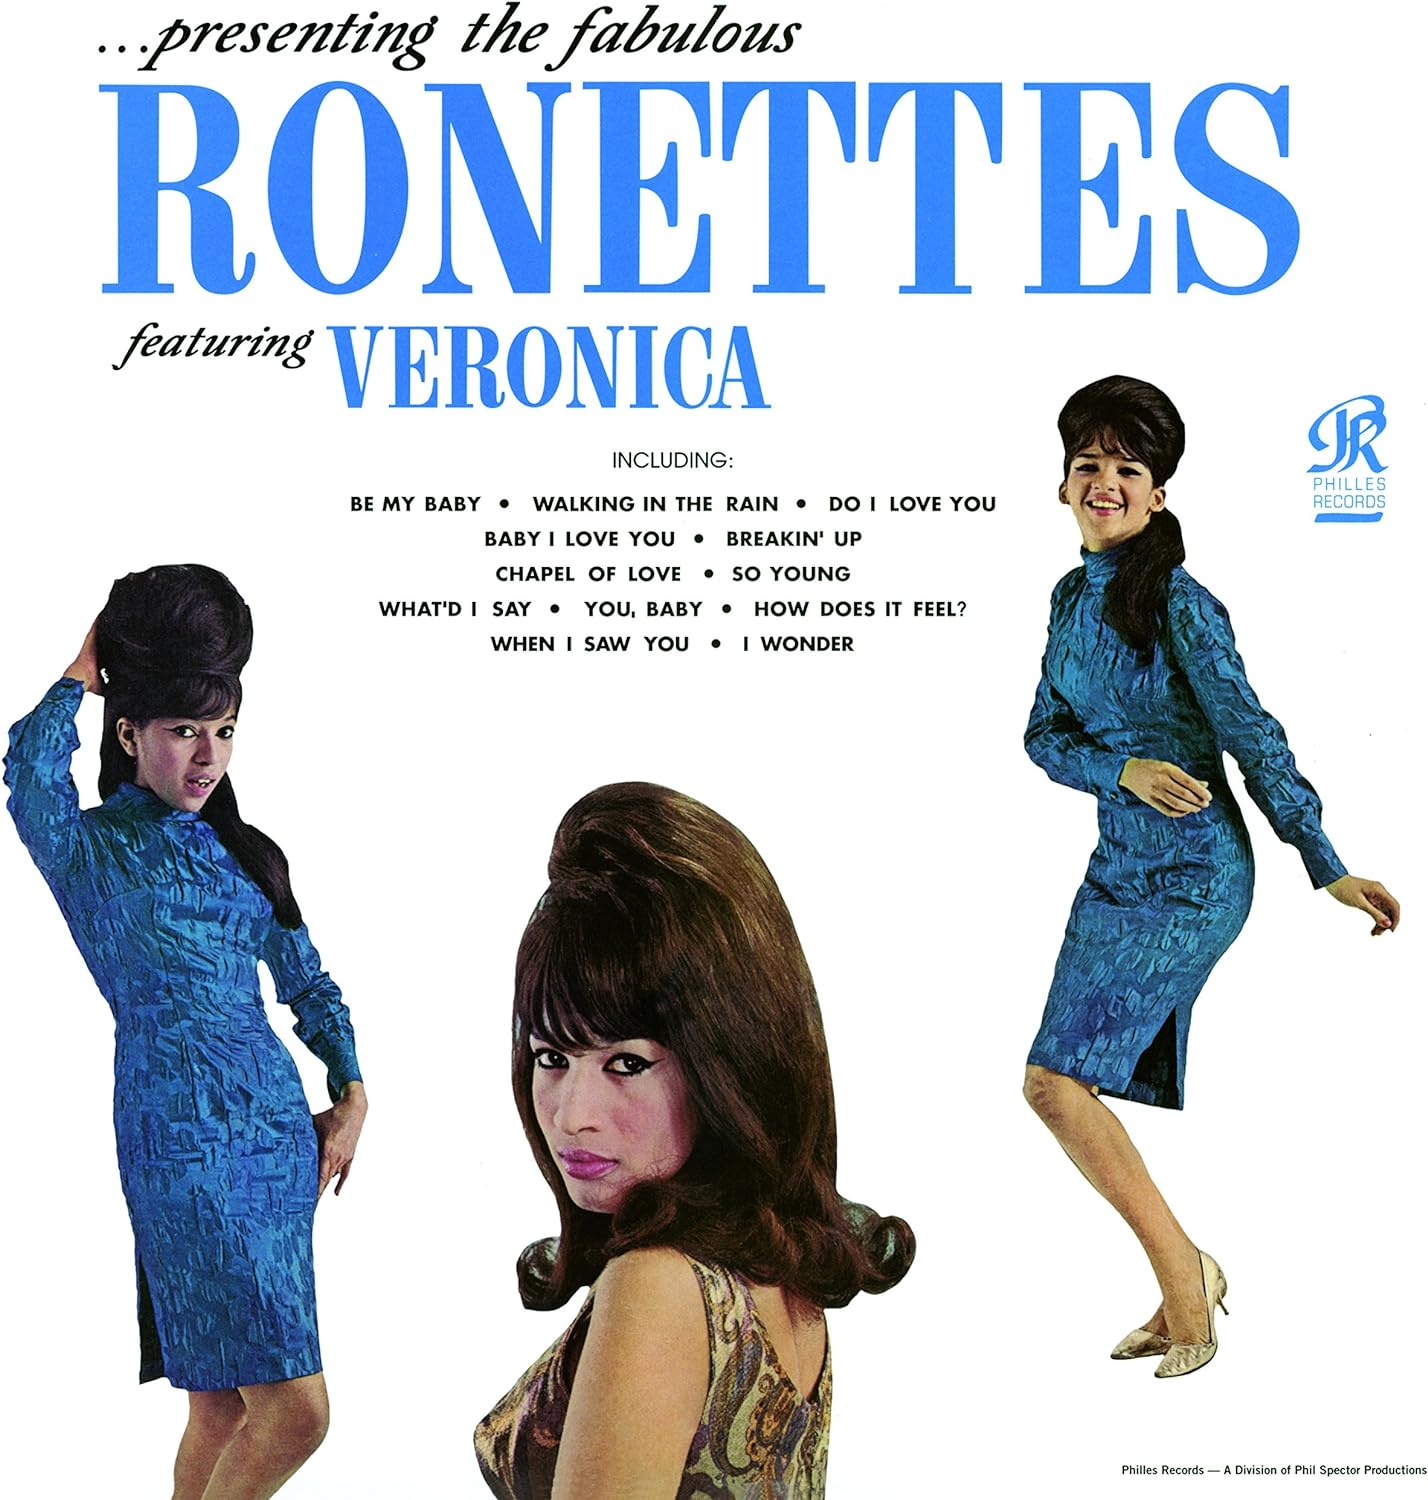 The Ronettes – Presenting The Fabulous Ronettes Featuring Veronica - 180 GRAM VINYL LP